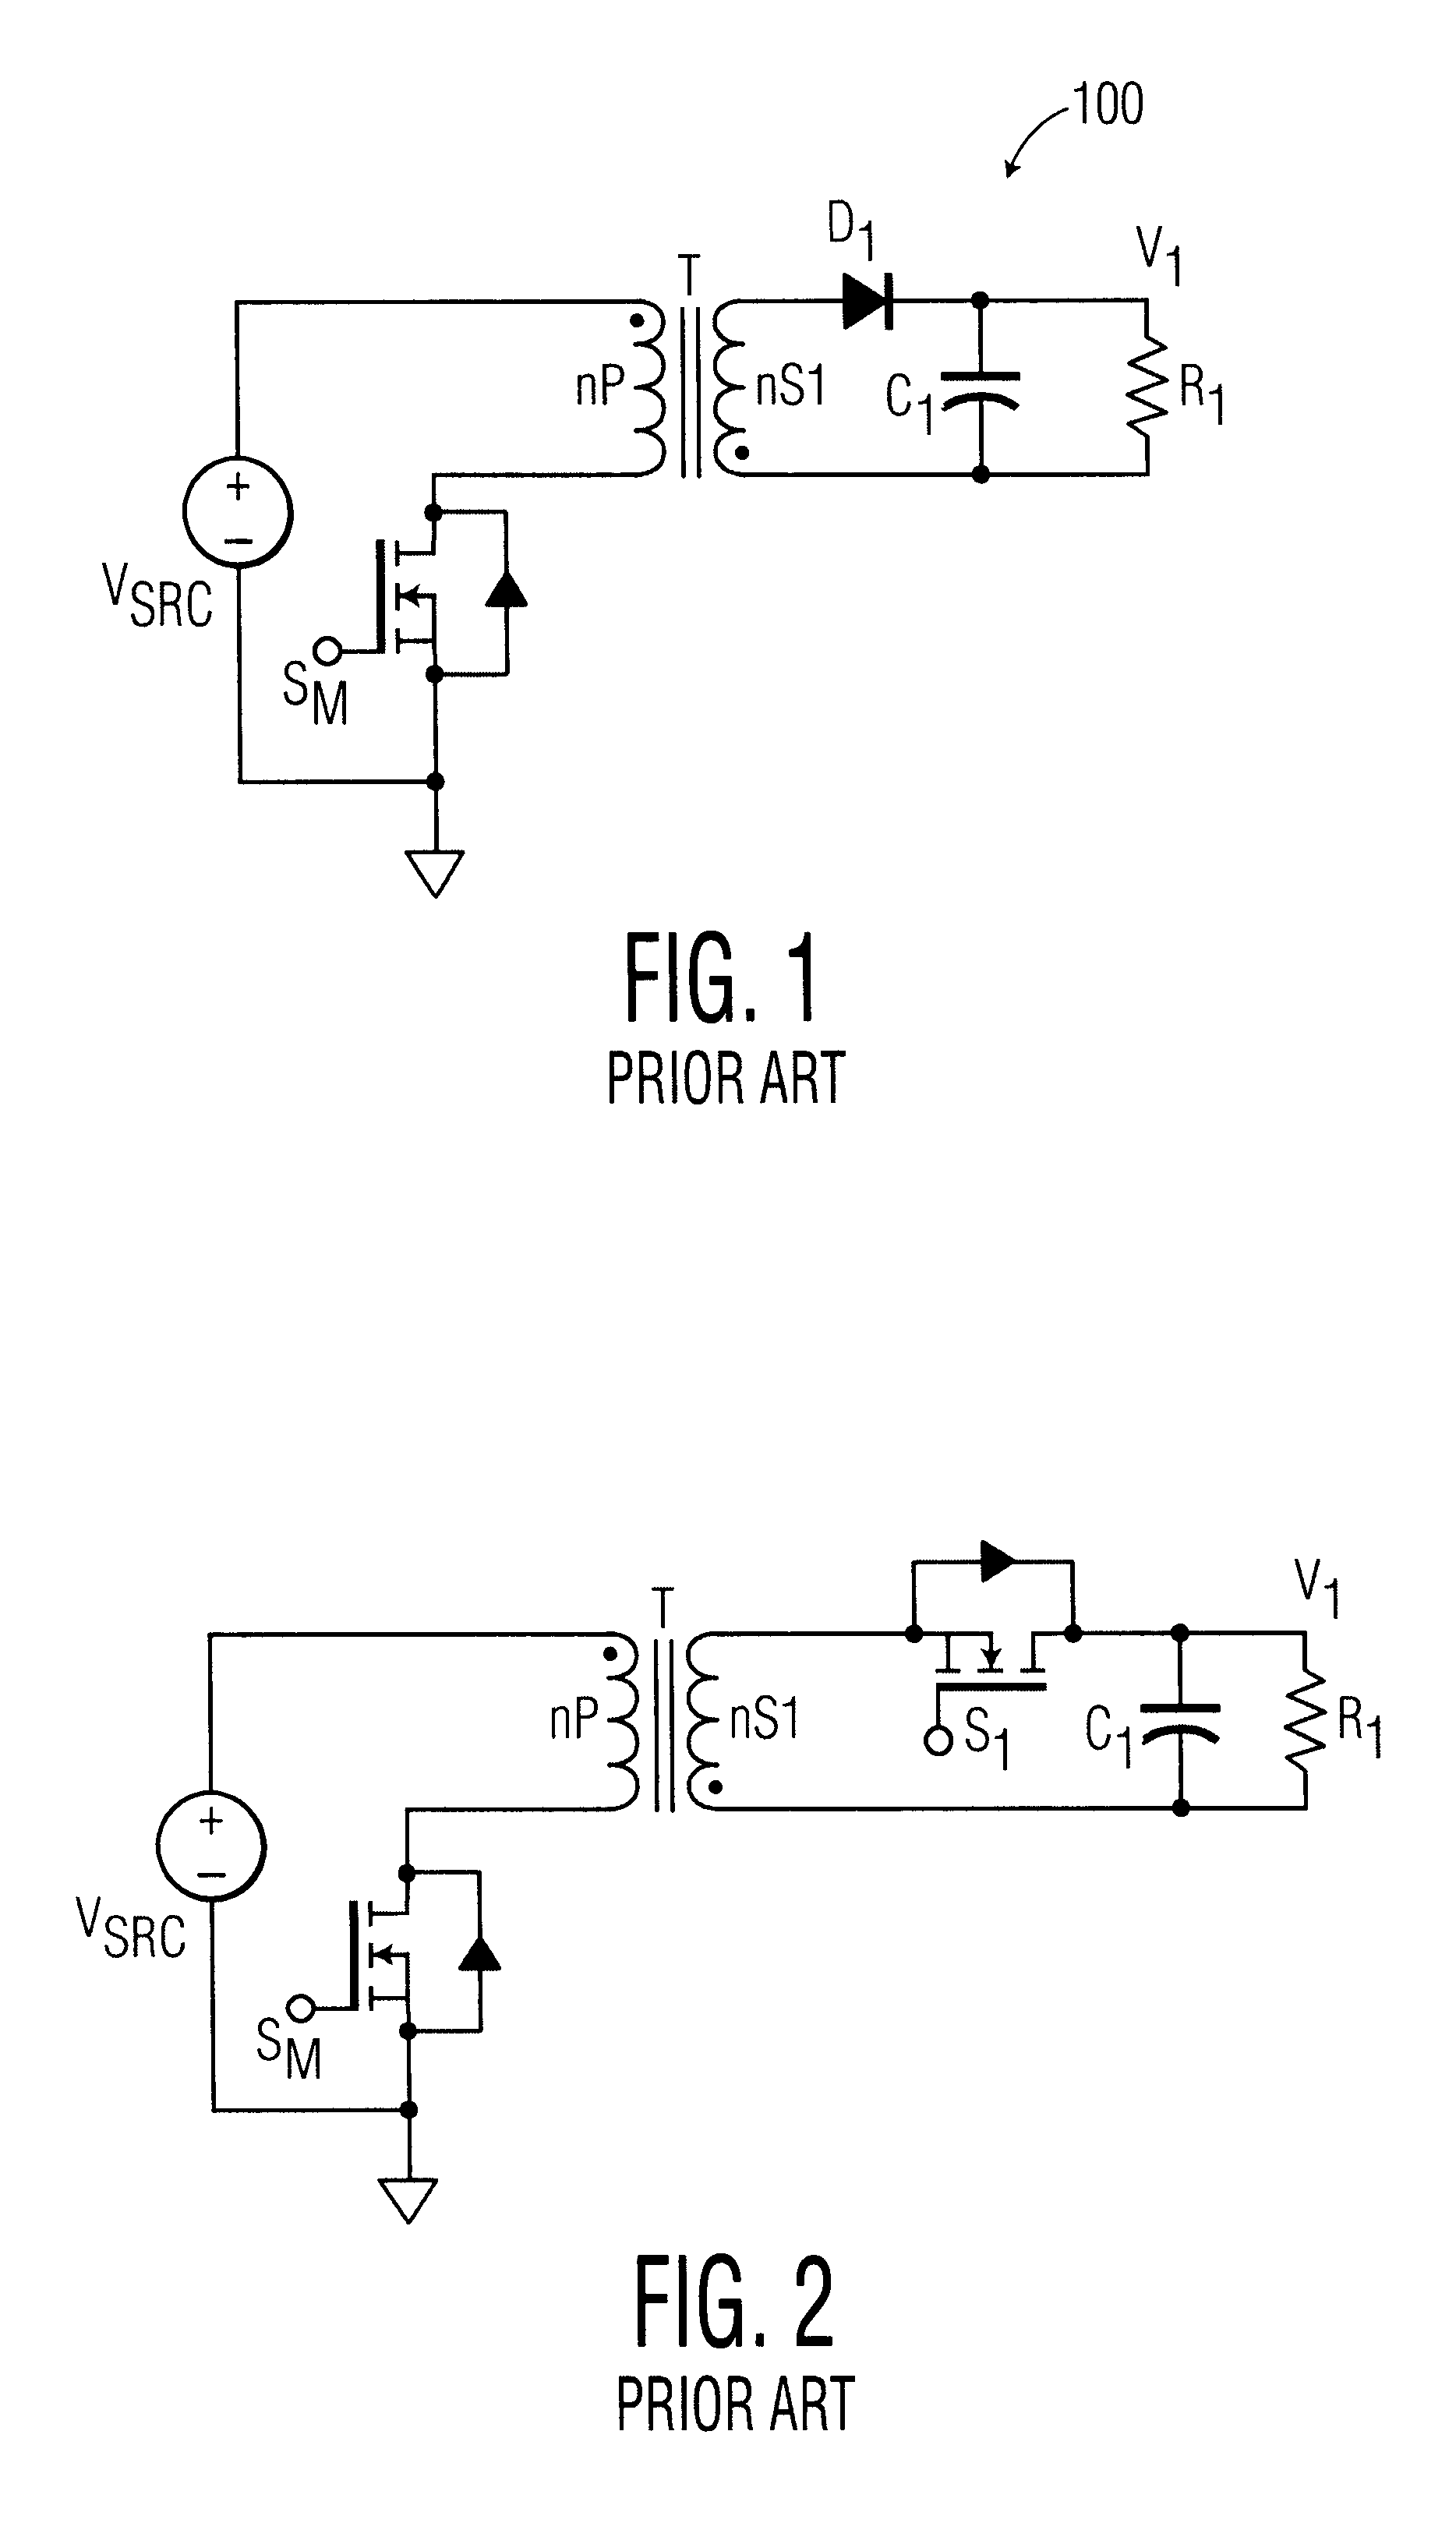 Independent regulation of multiple outputs in a soft-switching multiple-output flyback converter